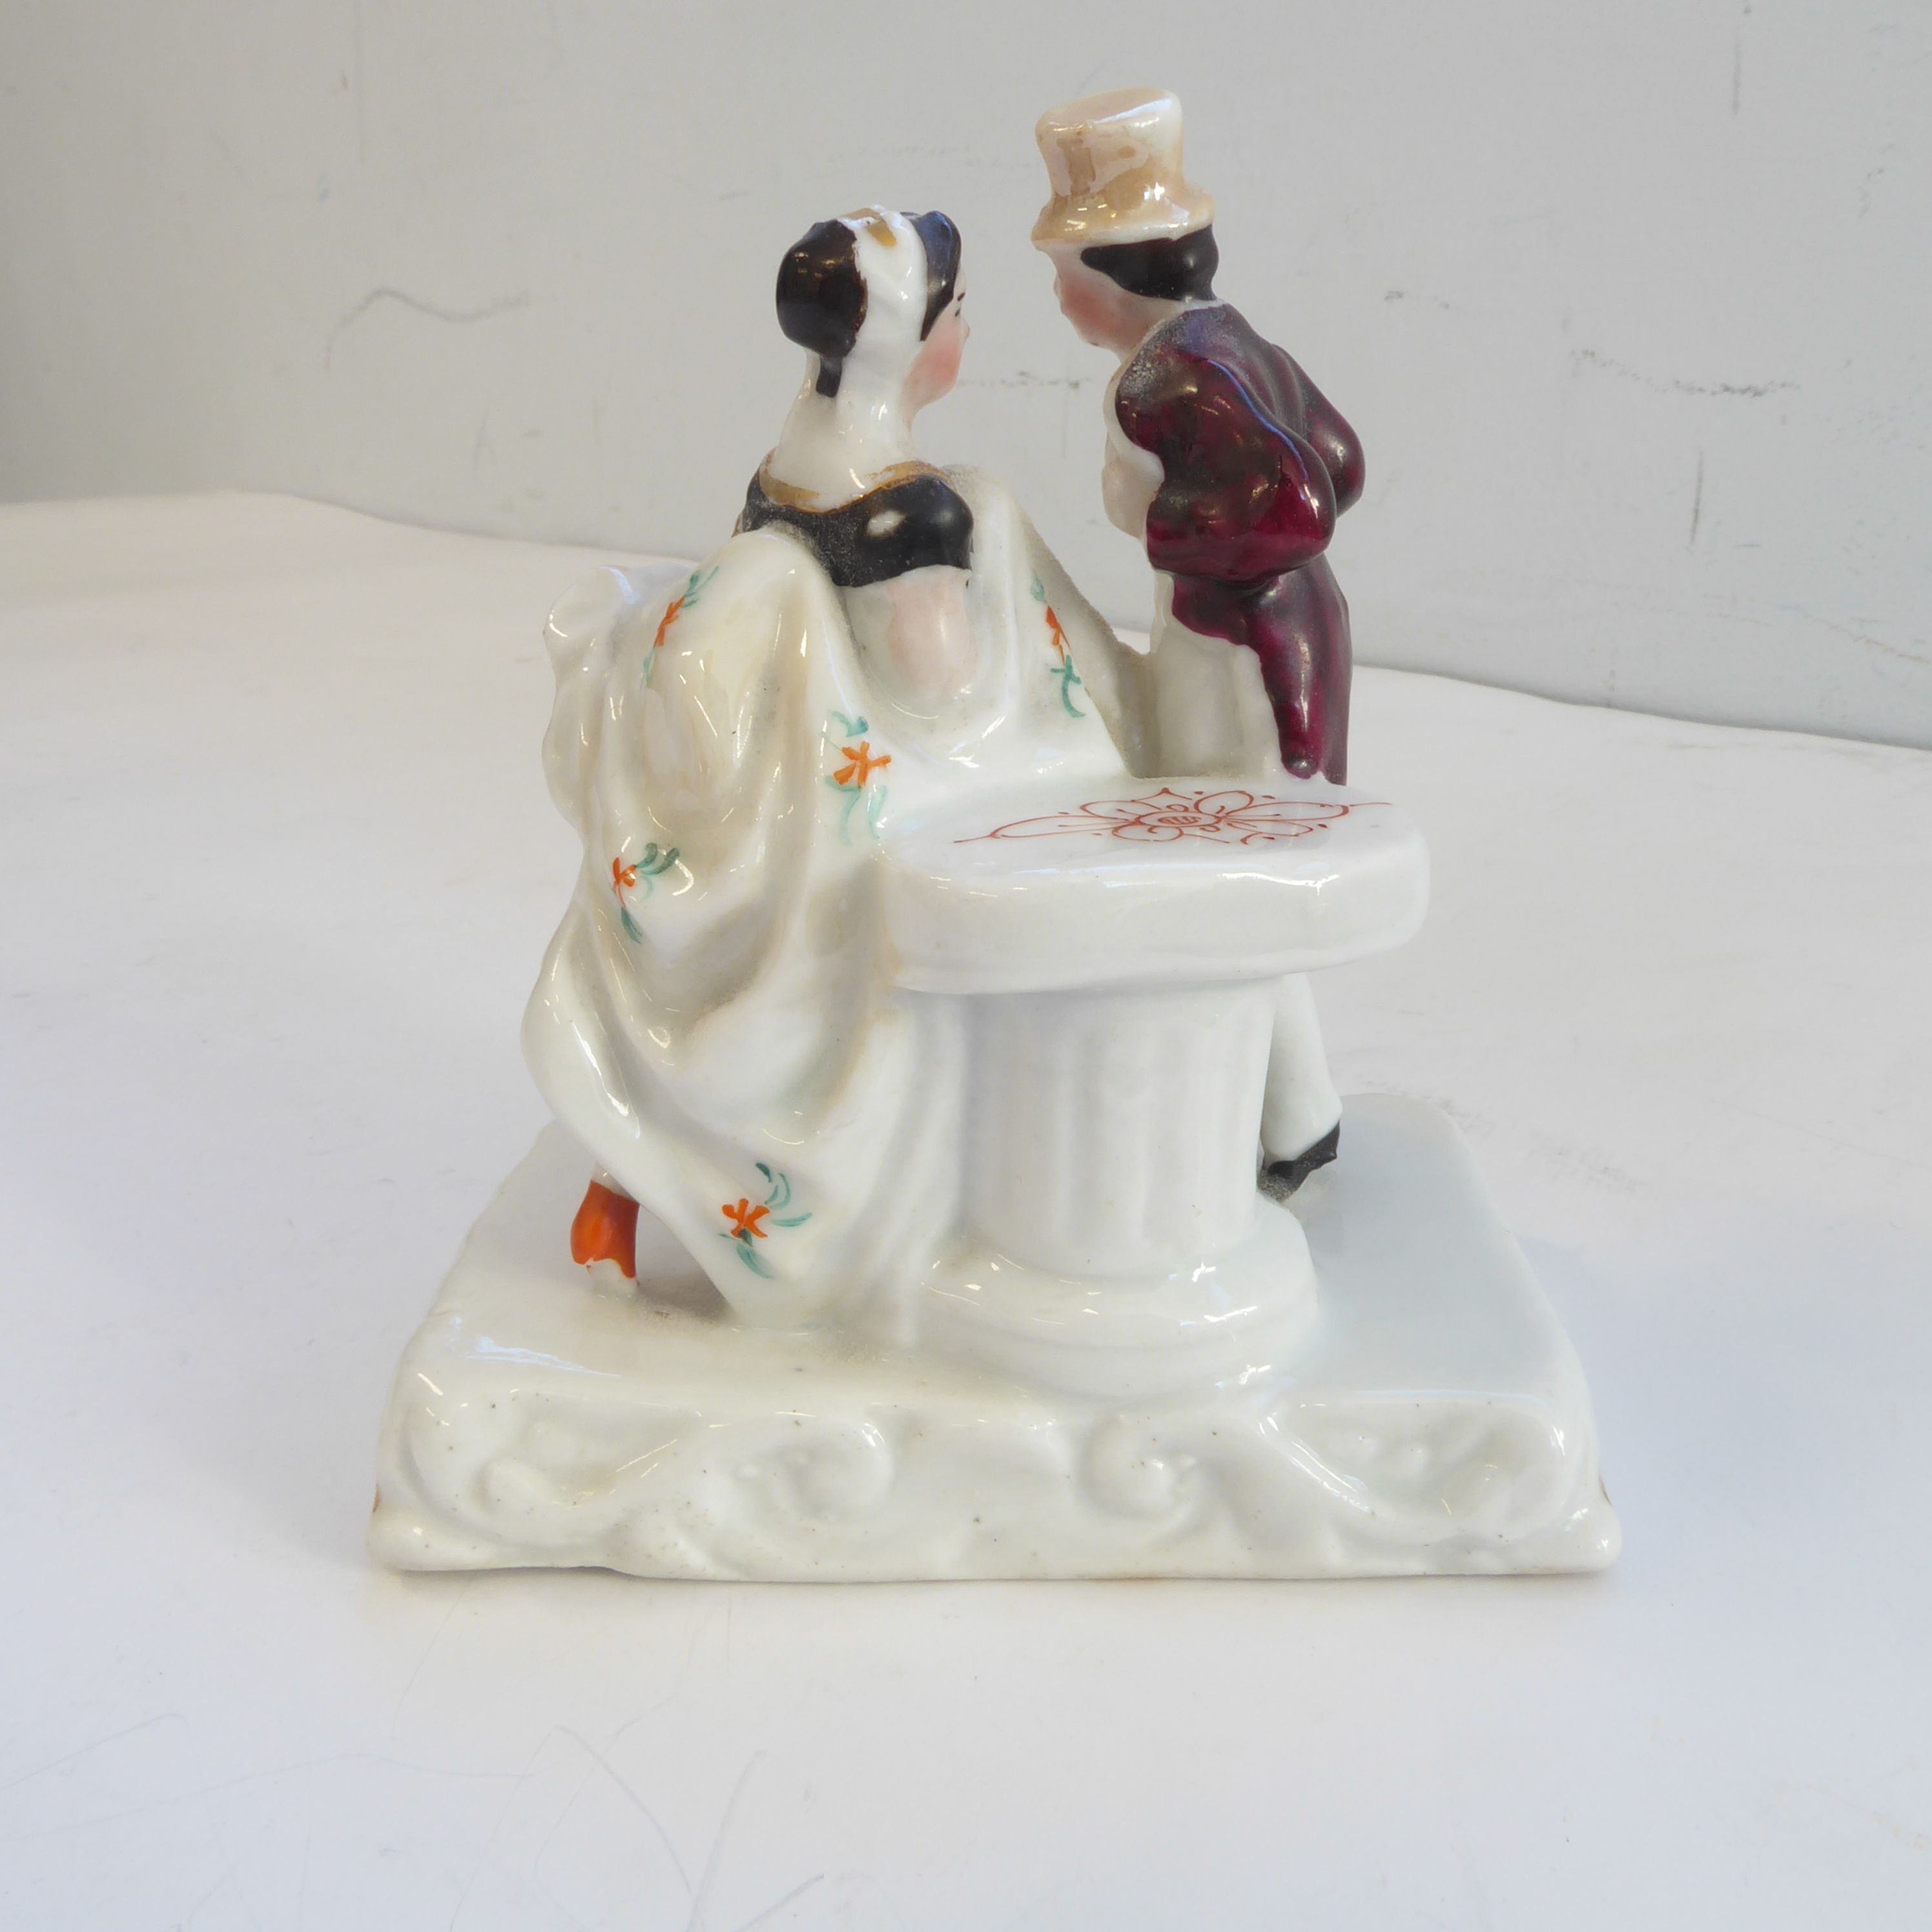 Twelve 19th century fairings to include 'The attentive maid', 'The broken hoop', 'The wedding - Image 47 of 49